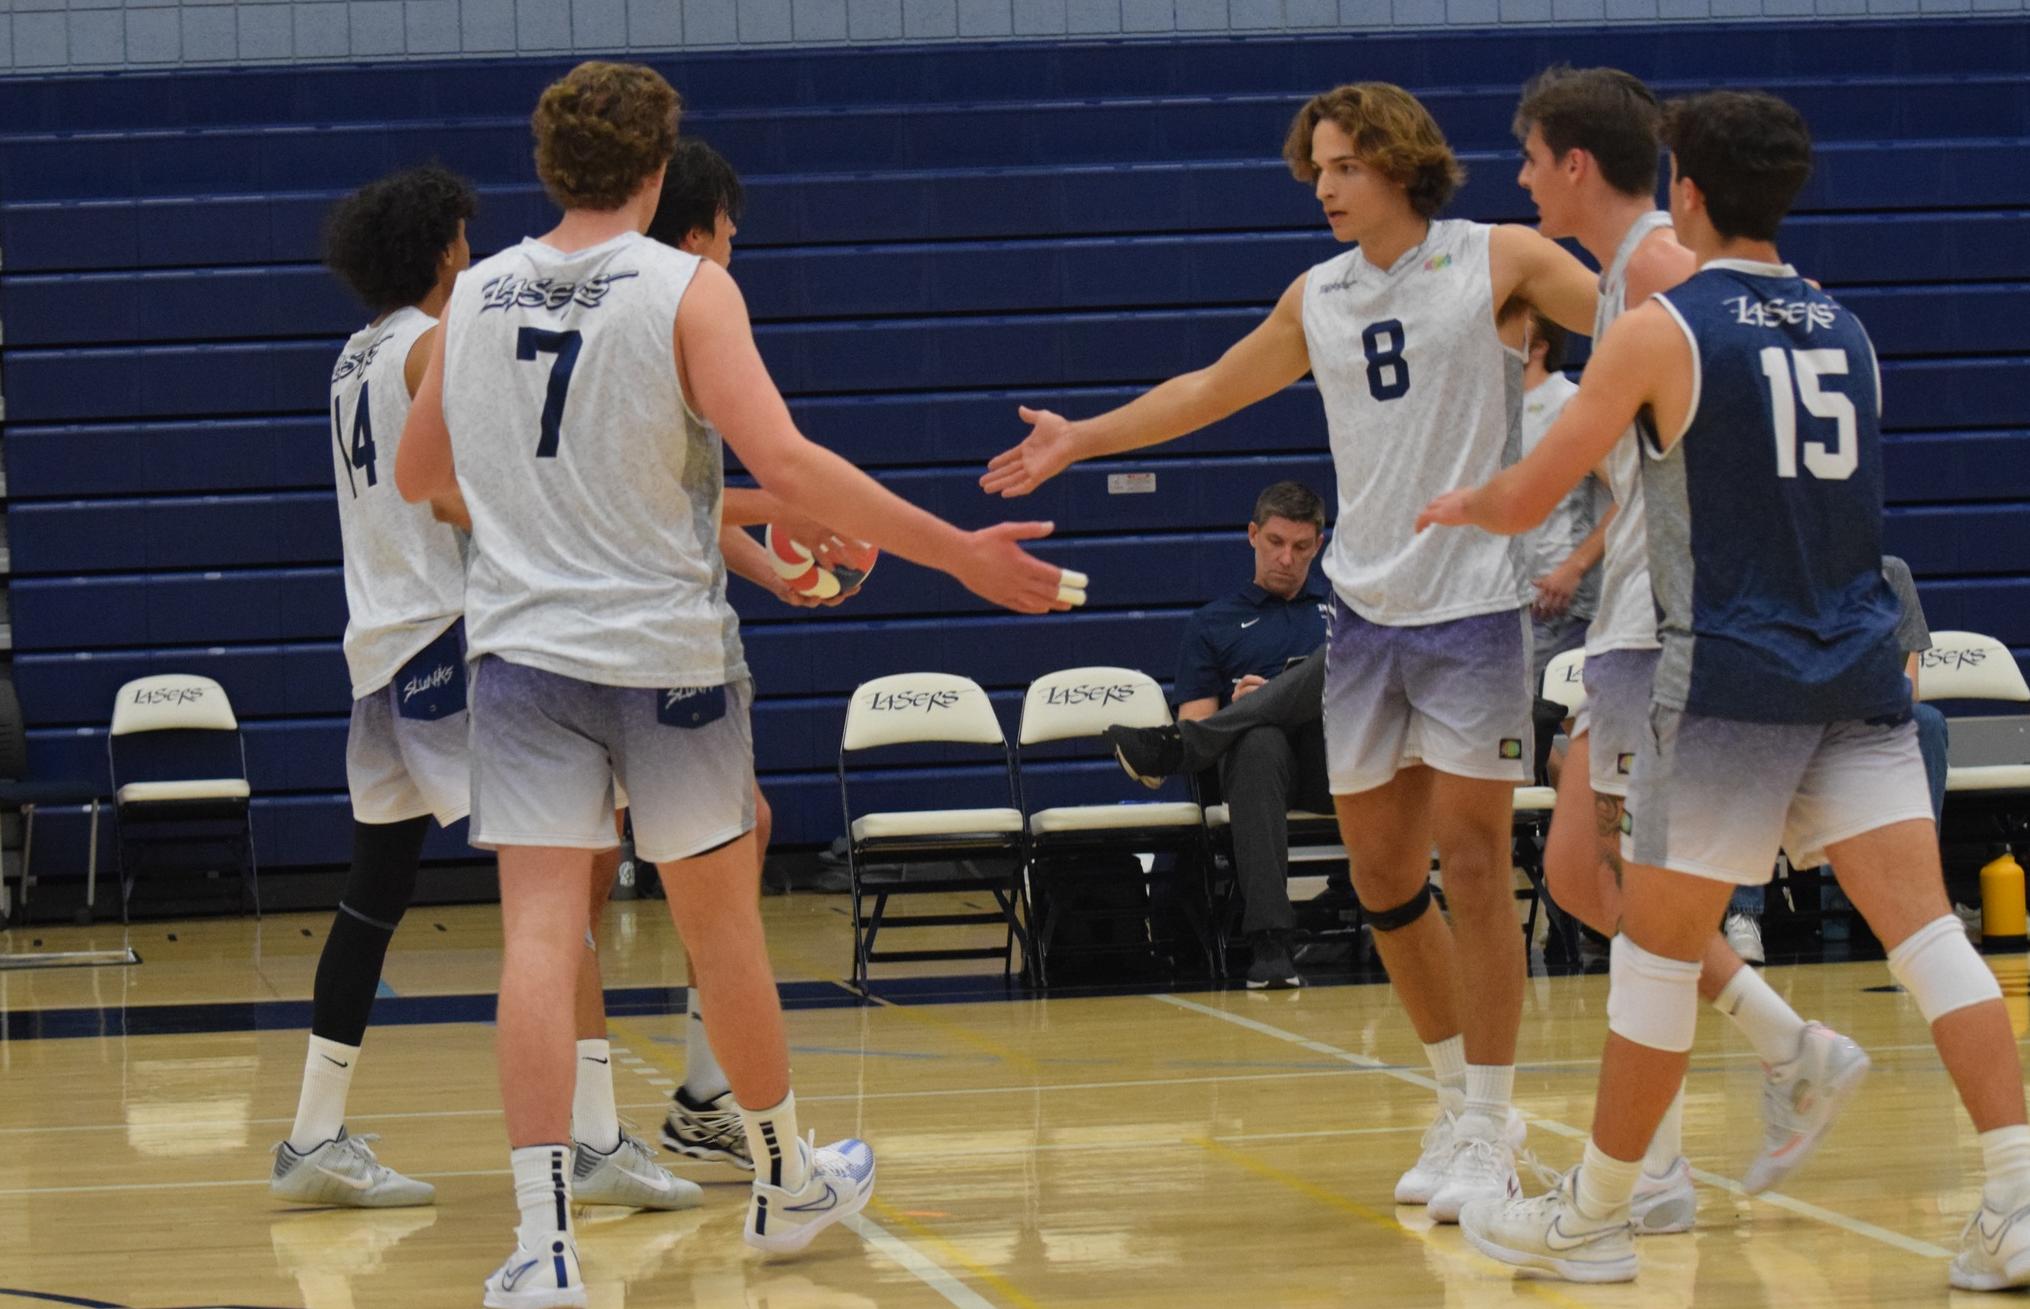 Men's volleyball team ranked No. 5 in first state poll of year